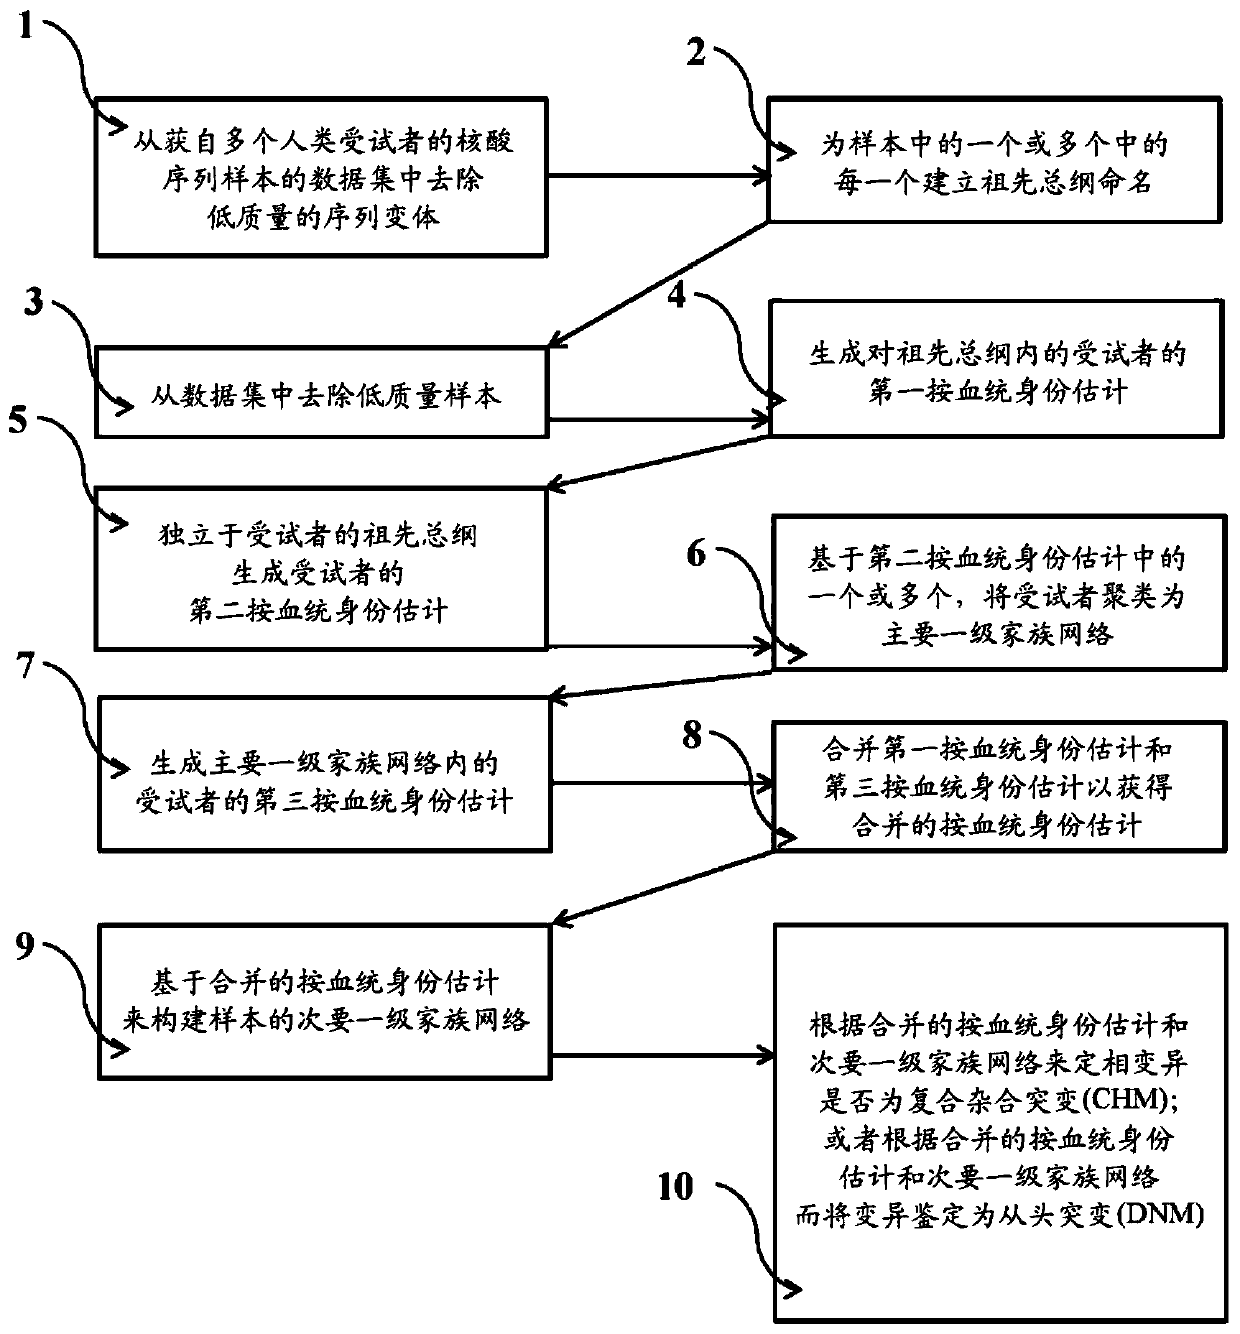 Systems and methods for leveraging relatedness in genomic data analysis